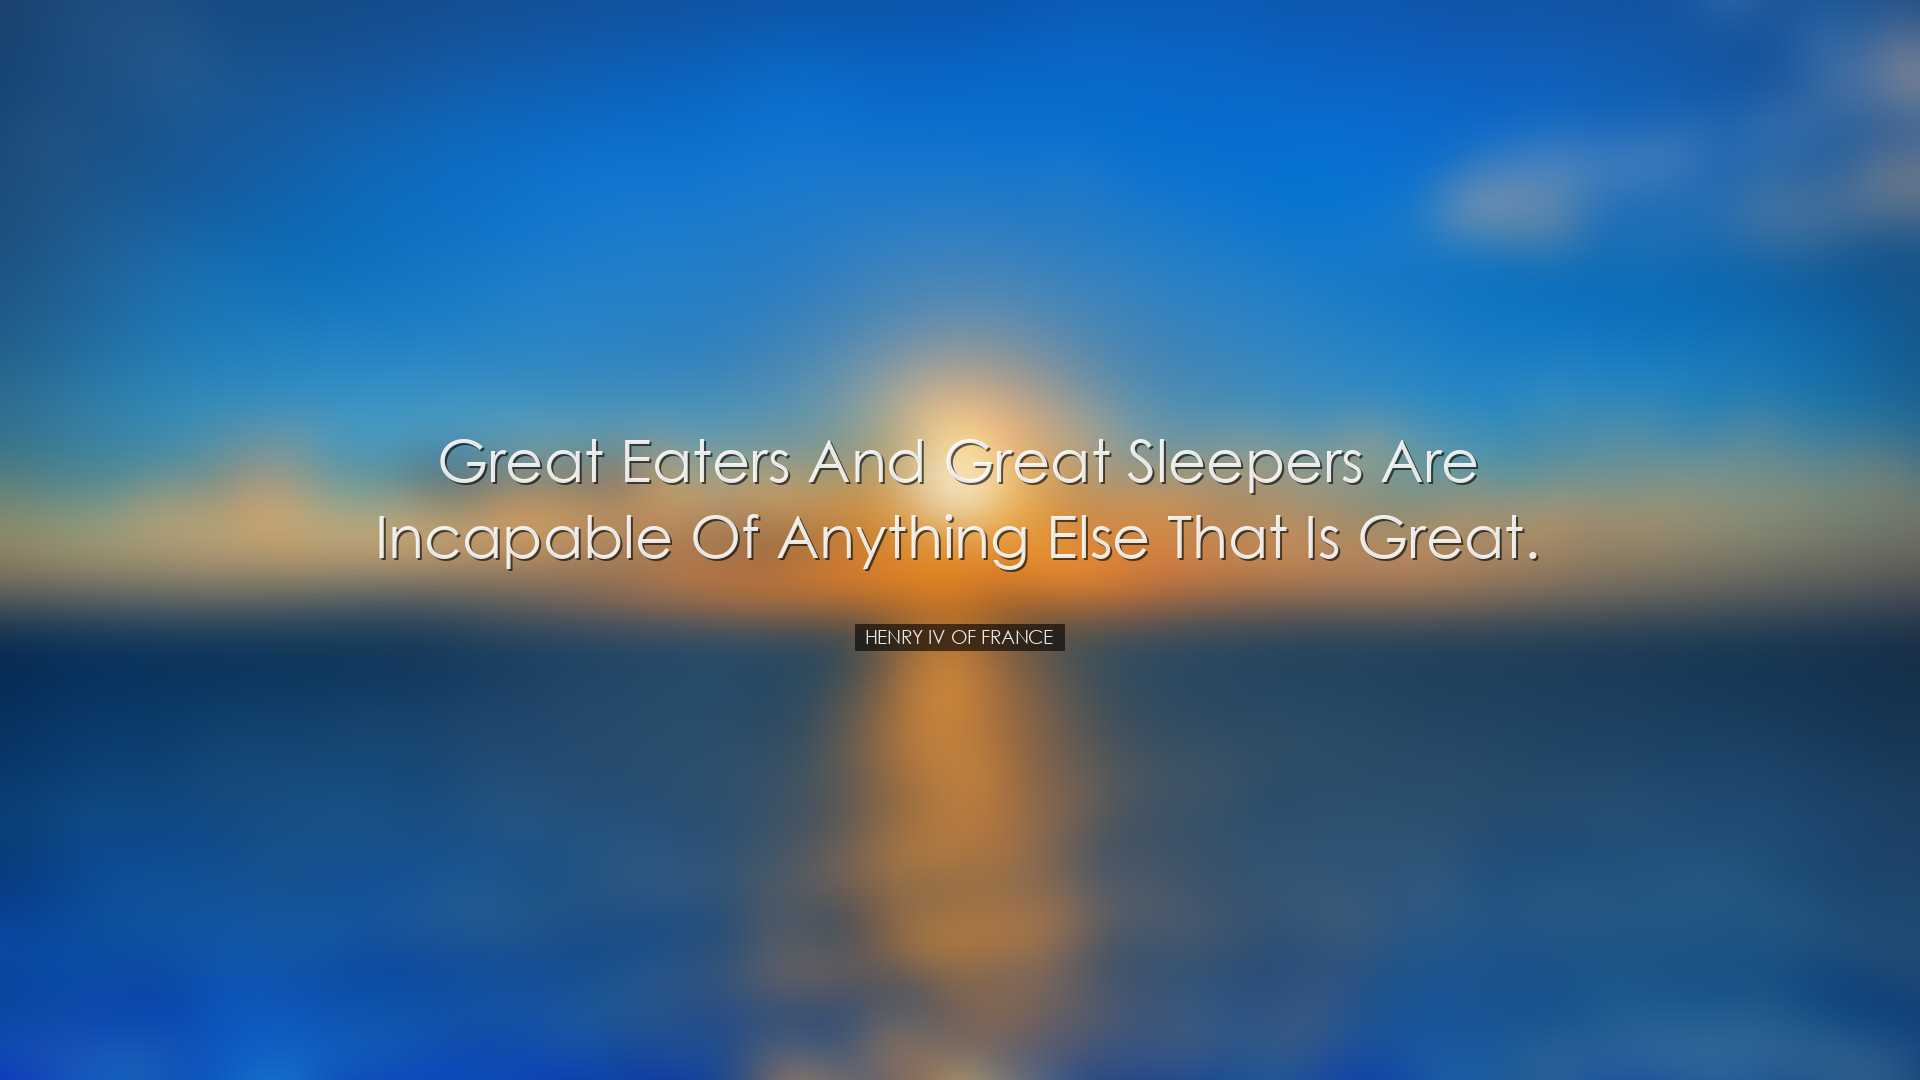 Great eaters and great sleepers are incapable of anything else tha